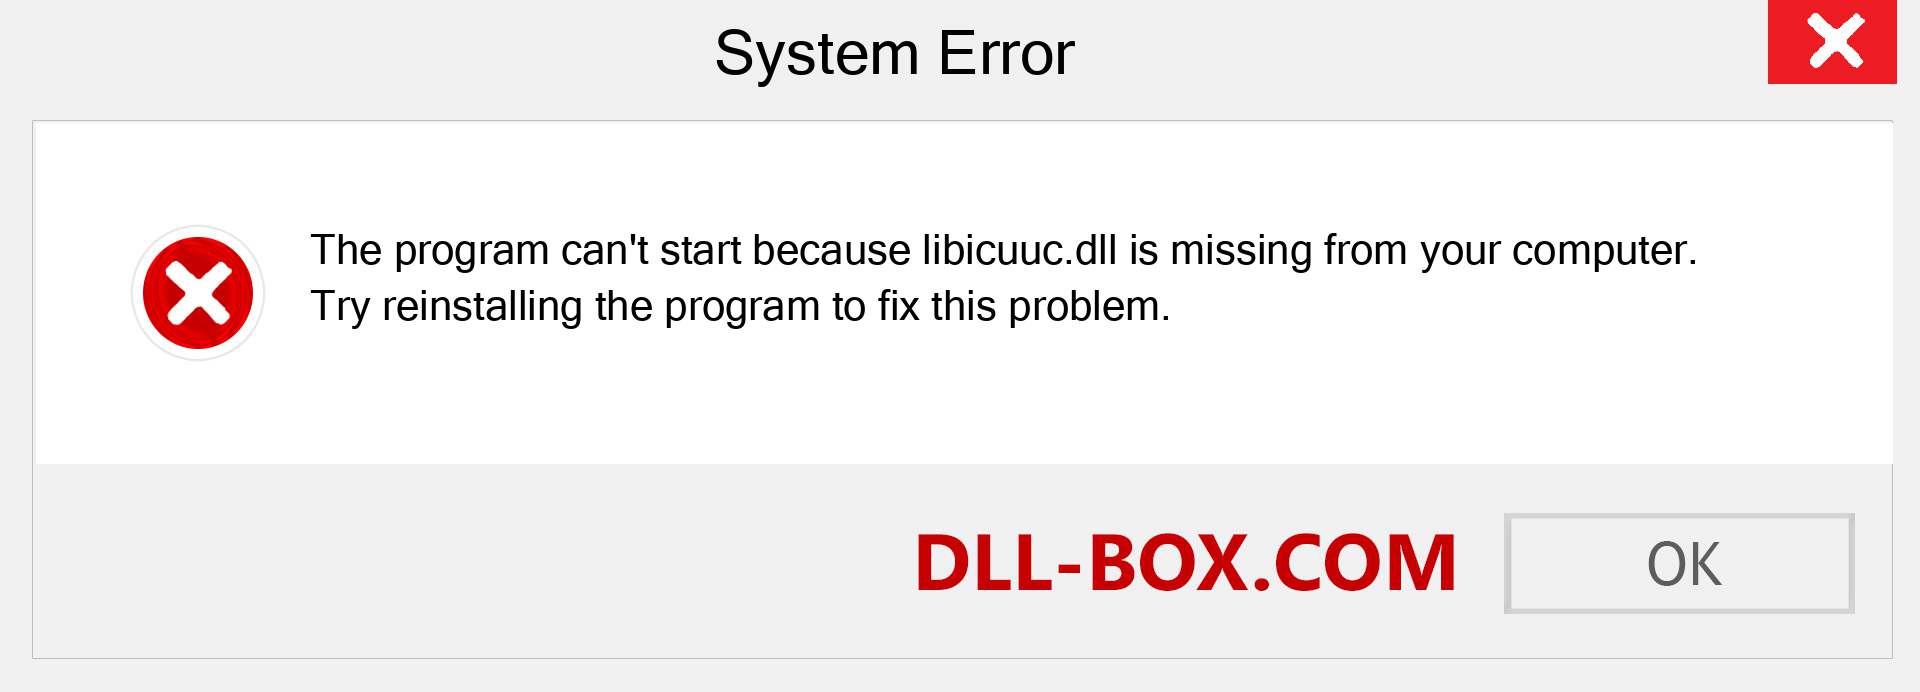  libicuuc.dll file is missing?. Download for Windows 7, 8, 10 - Fix  libicuuc dll Missing Error on Windows, photos, images